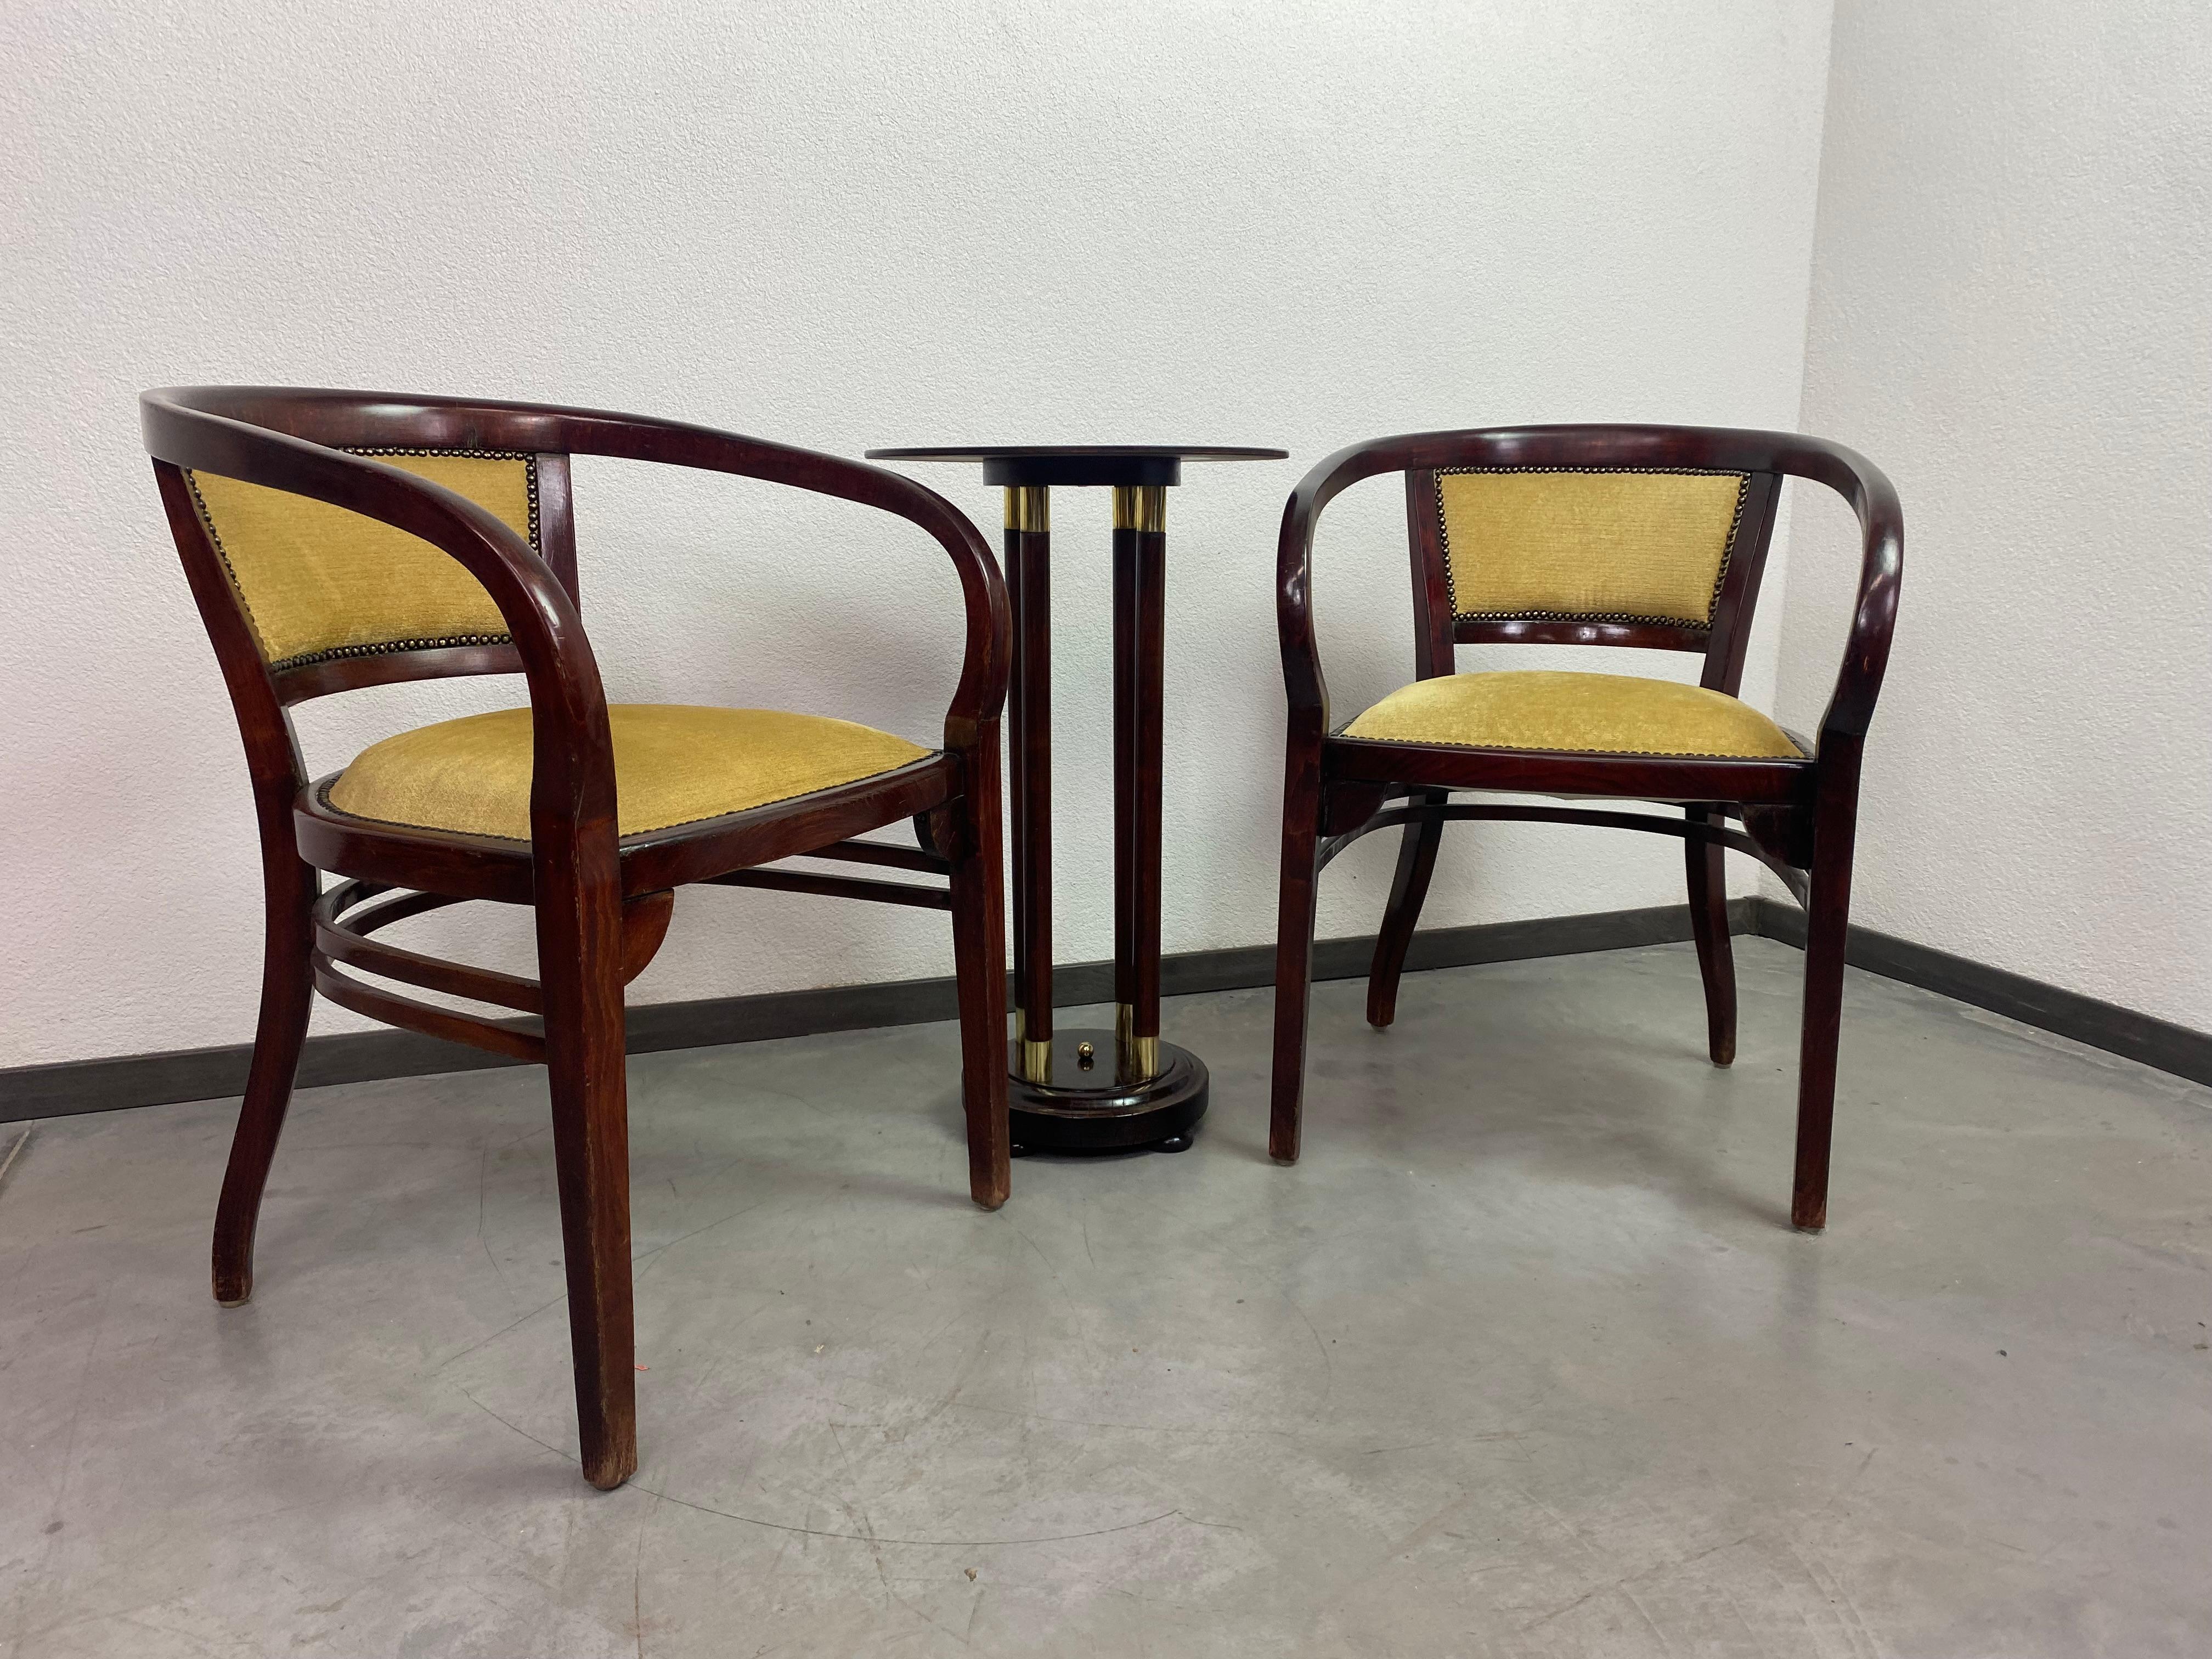 Extremely rare armchairs no.6521 Thonet Otto Wagner in very good original contidion with signs of use.